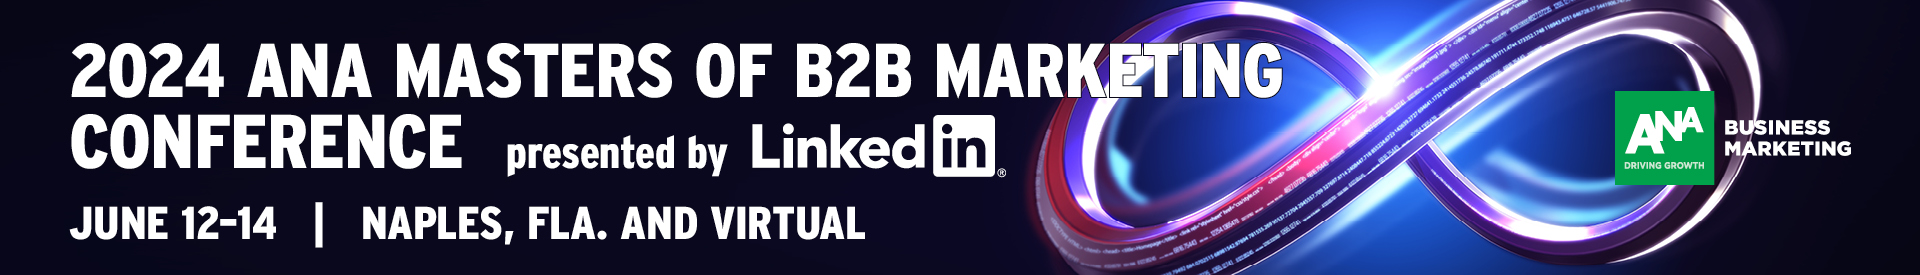 2024 Masters of B2B Marketing Conference logo banner